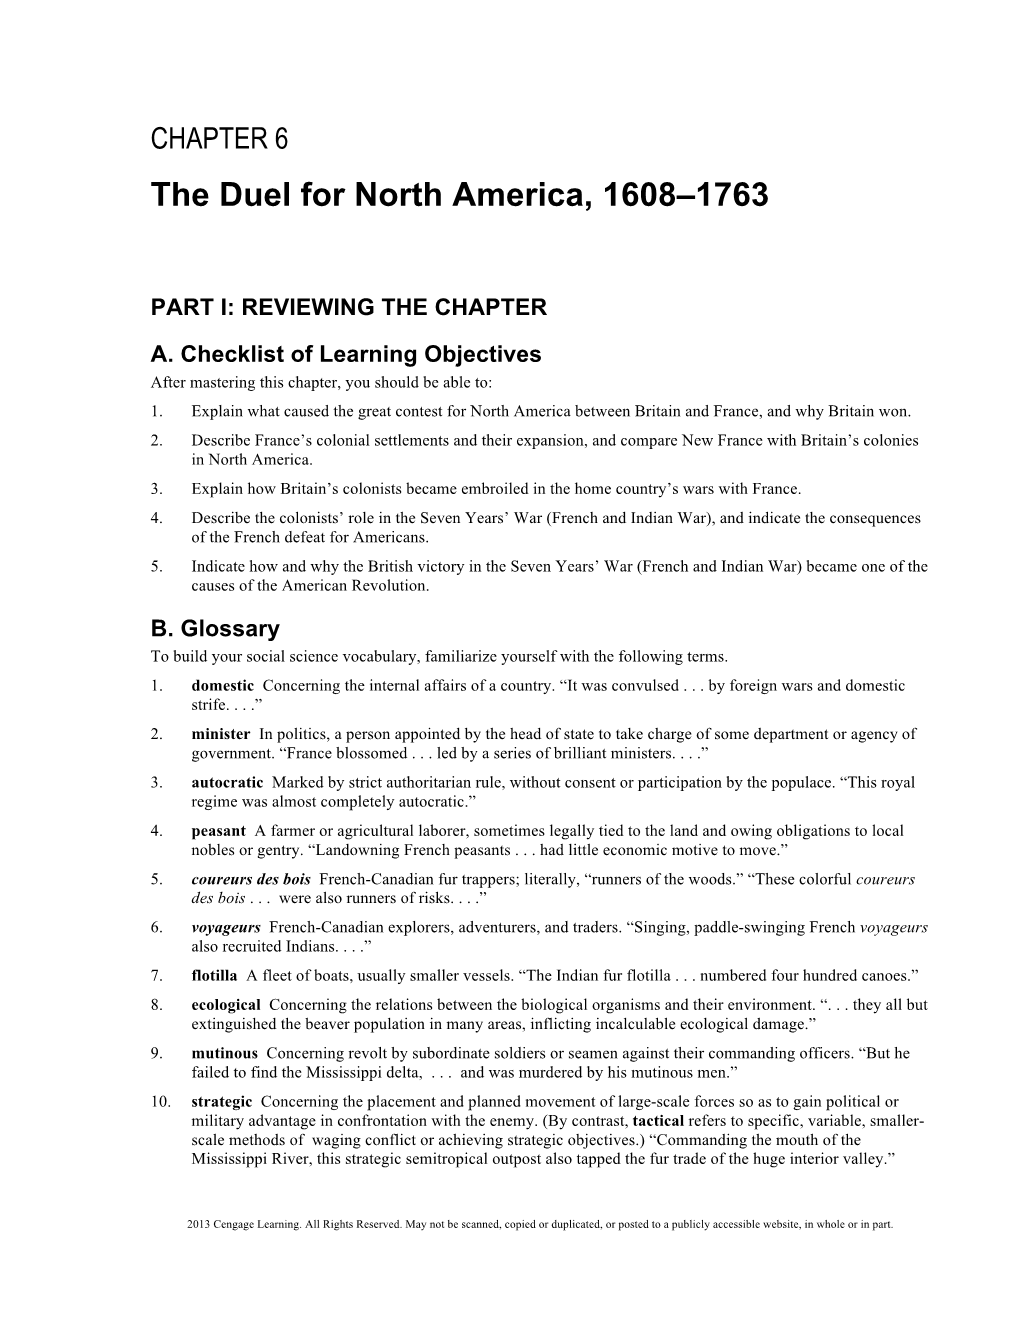 CHAPTER 6 the Duel for North America, 1608–1763